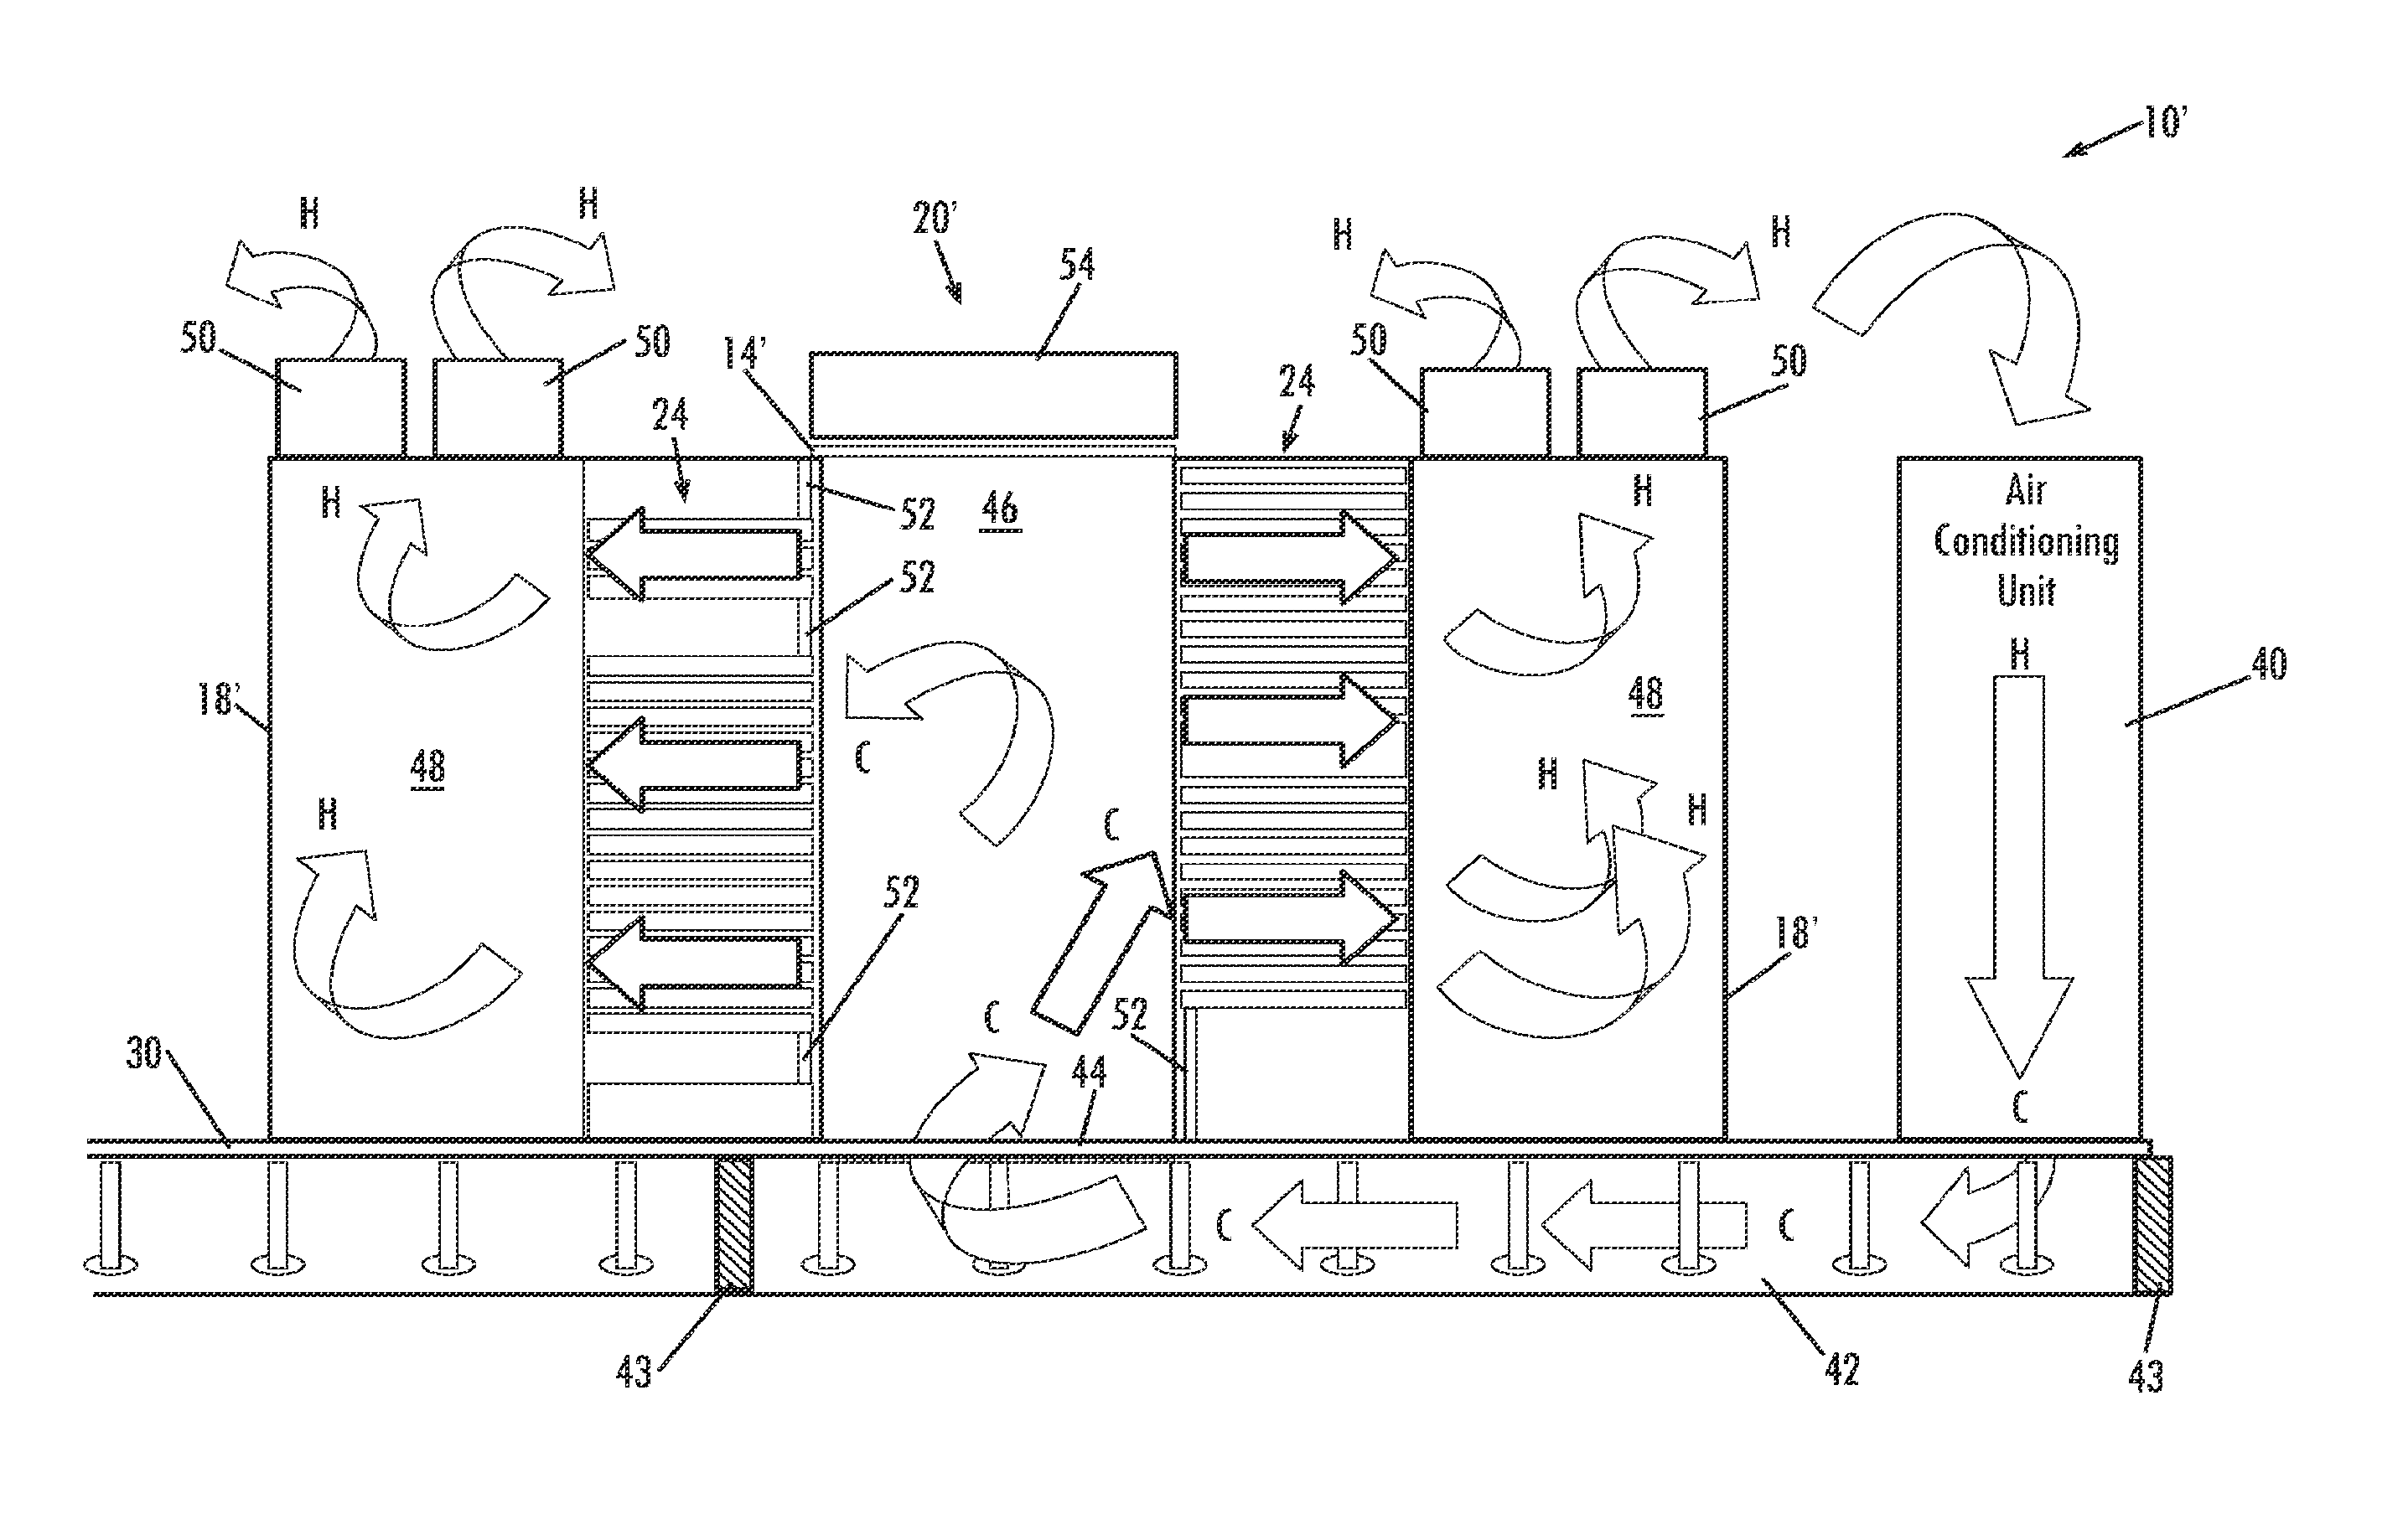 Energy saving system and method for cooling computer data center and telecom equipment